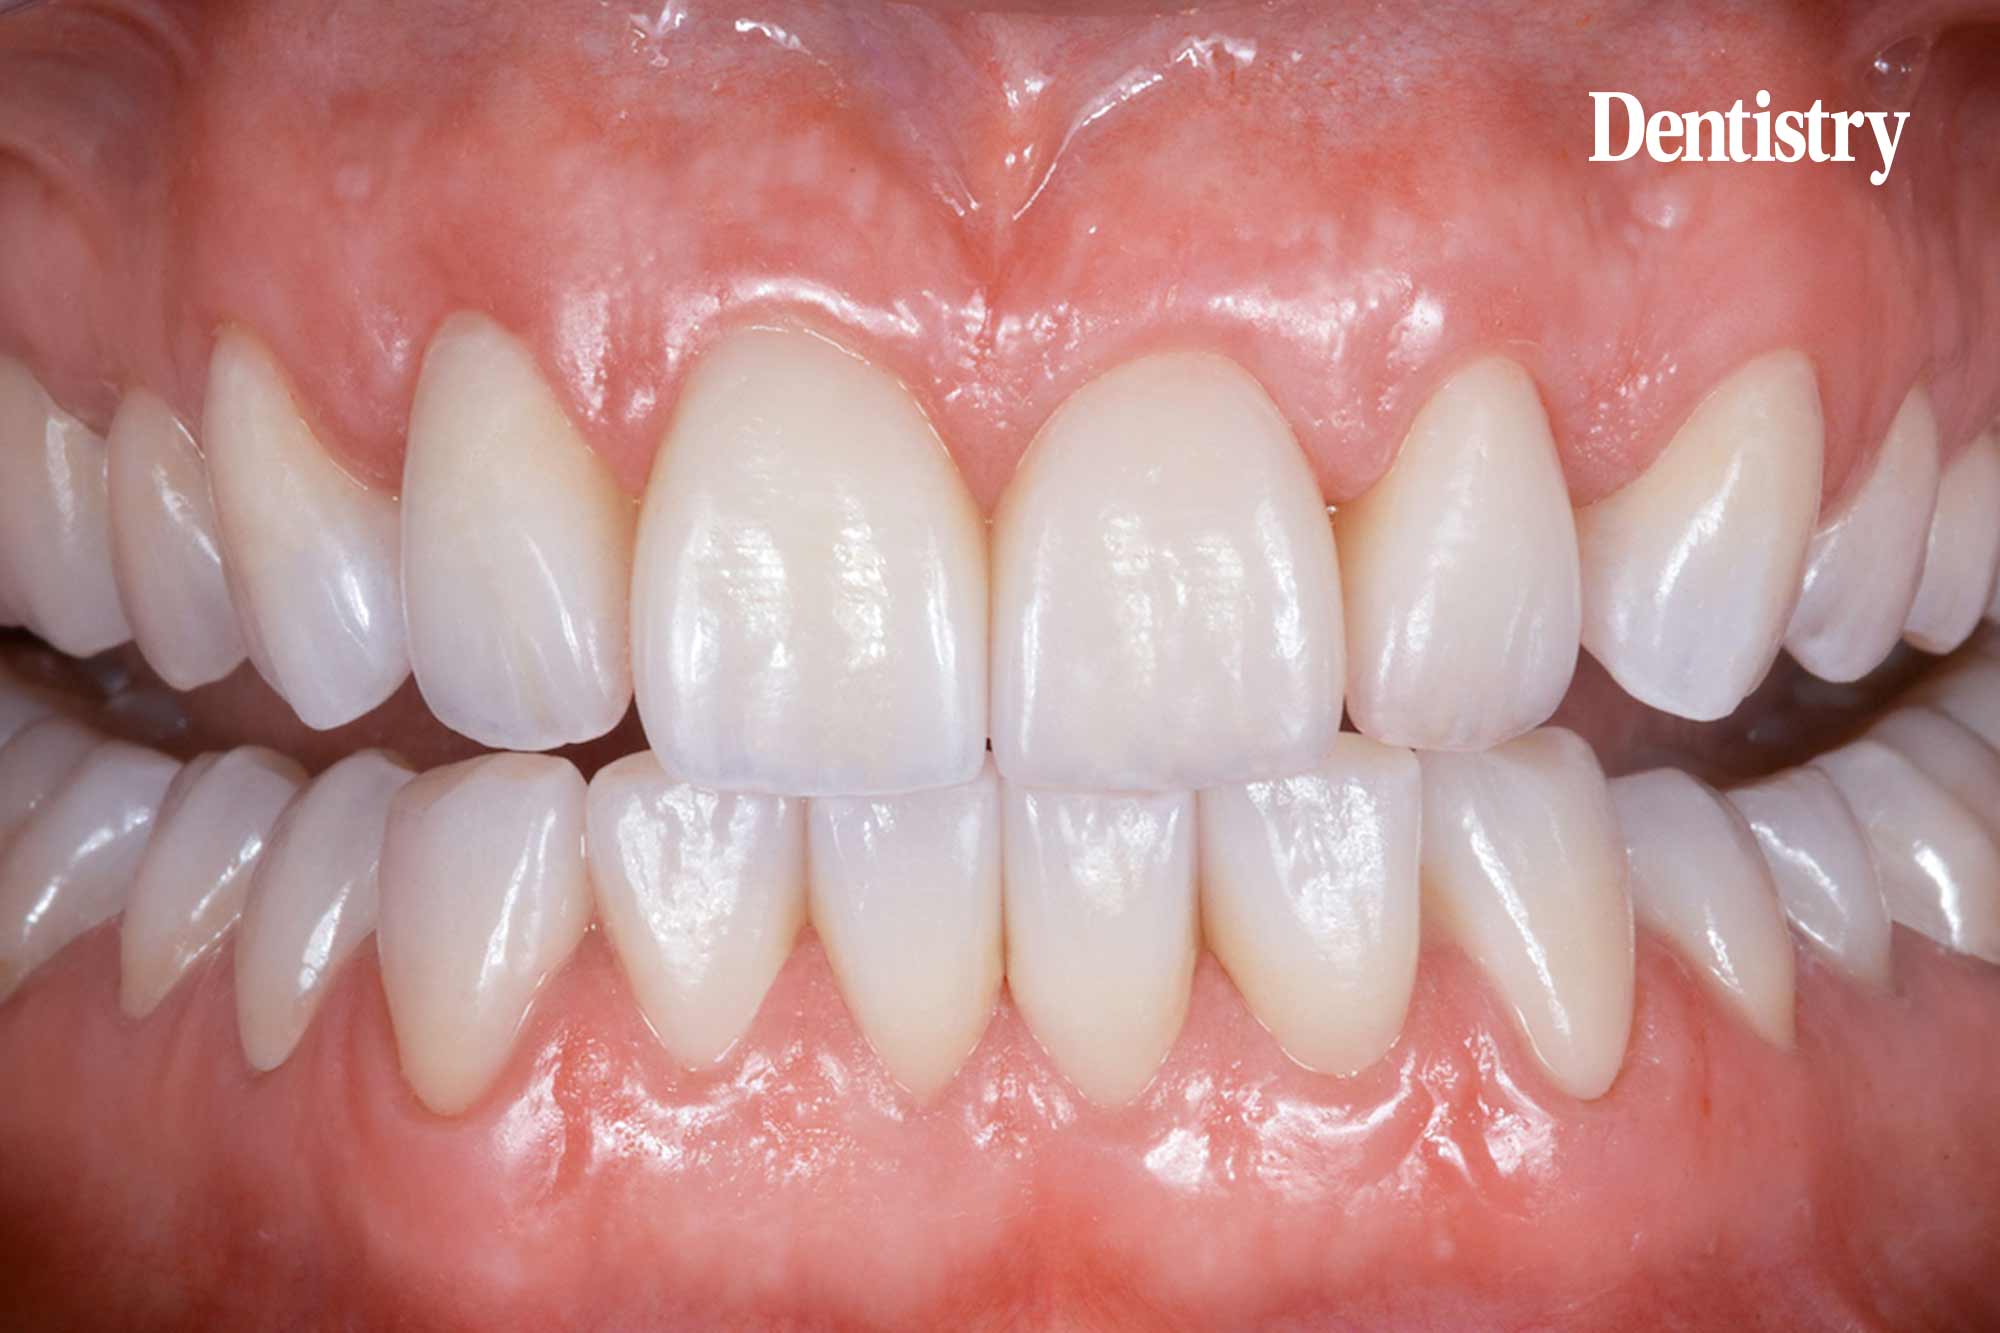 Treatment of tooth wear with zirconia crowns